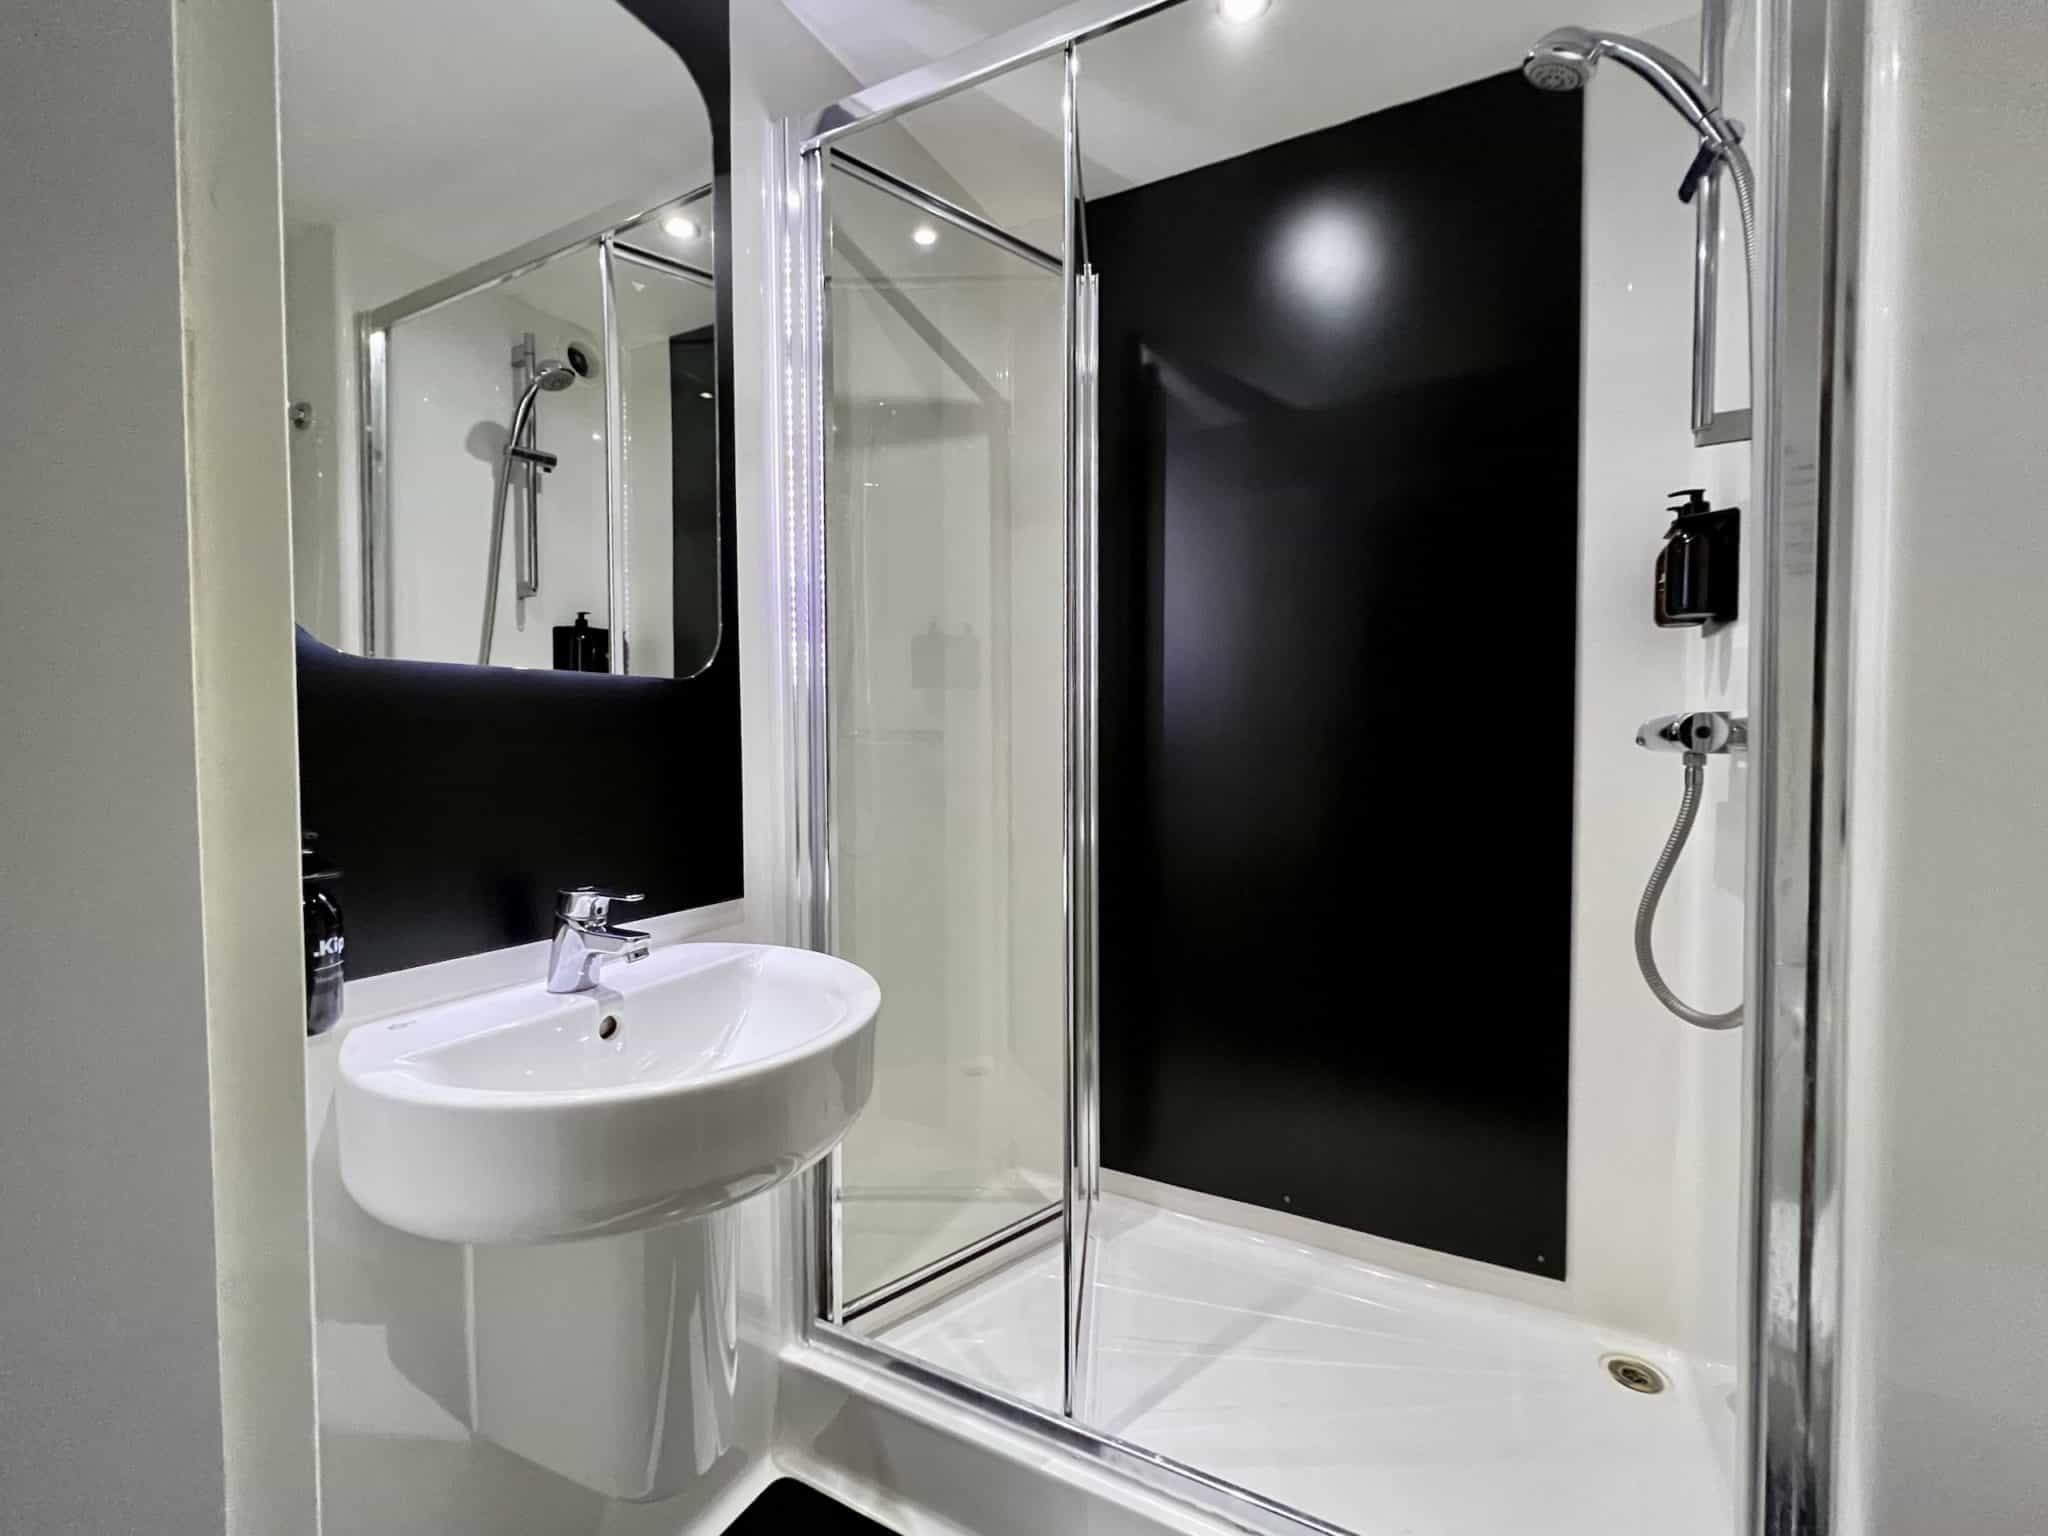 A spotlessly clean bathroom, with a sink and shower visible